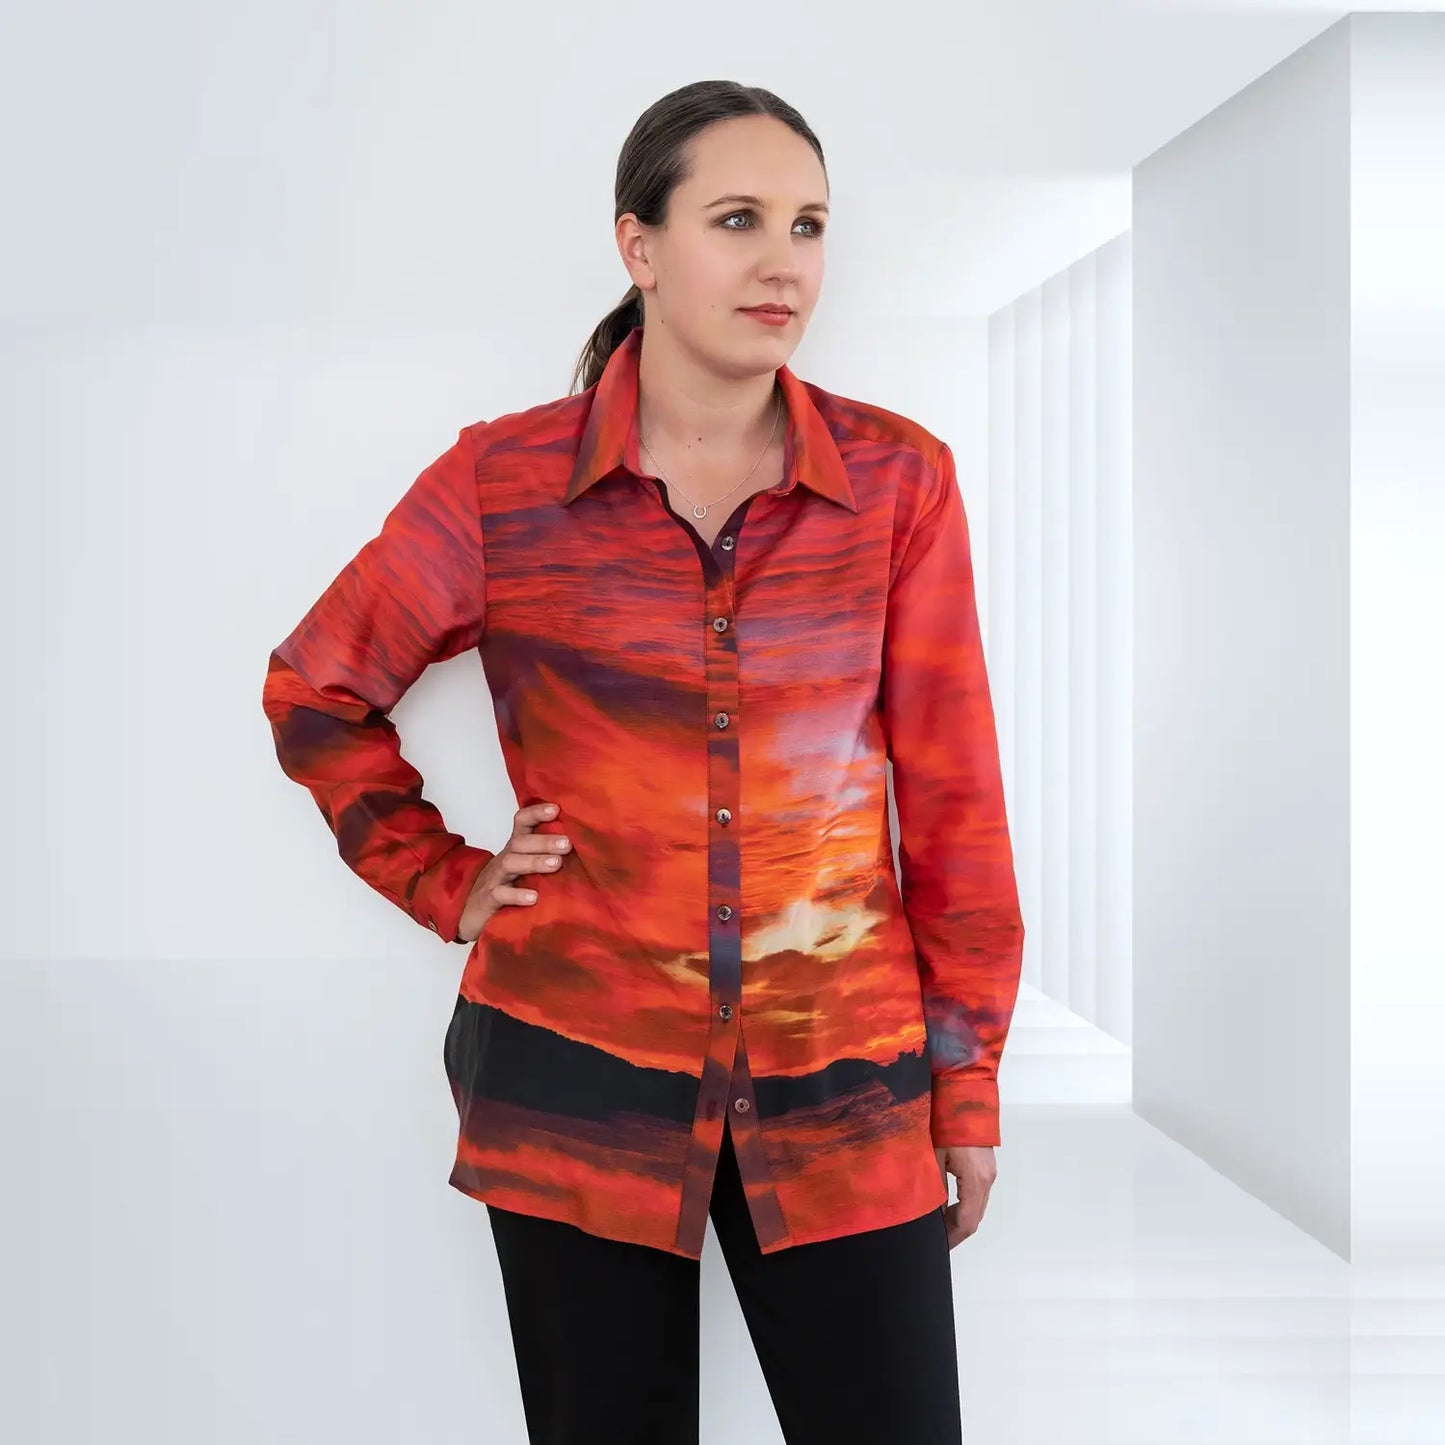 red hot silk cotton shirt by seahorse silks australia with black pants